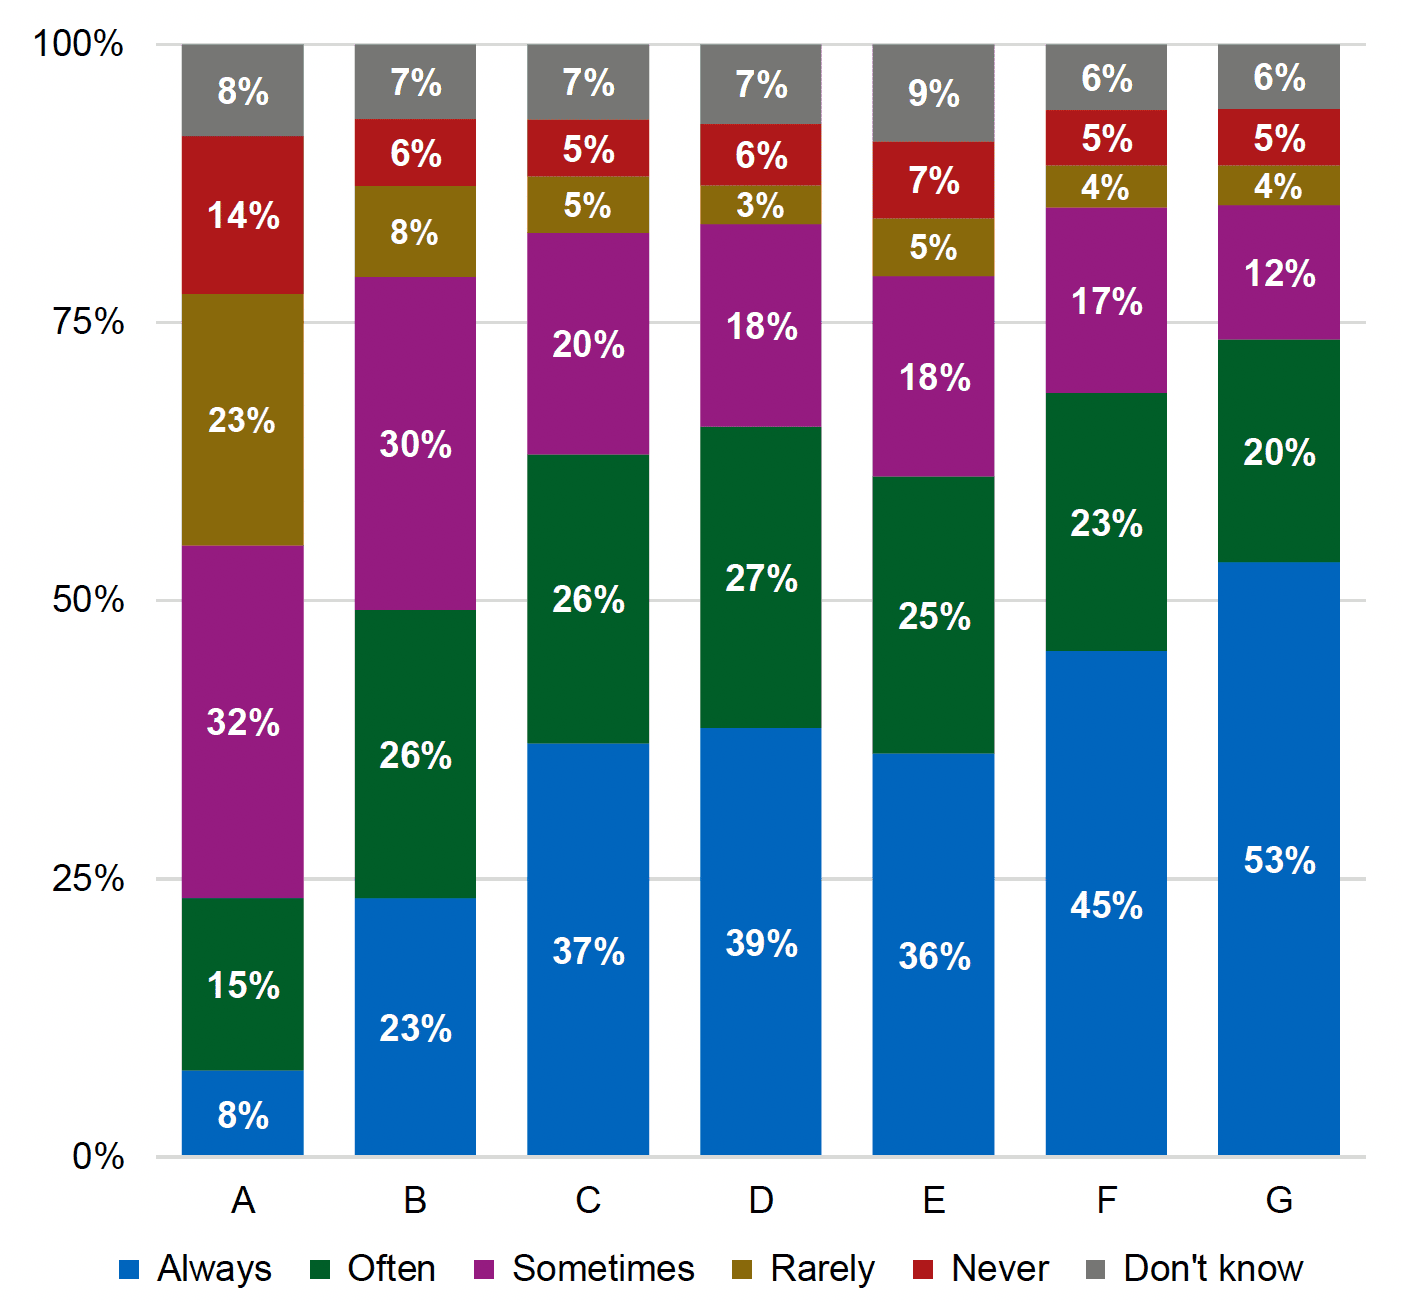 A stacked column chart showing the percentage of people who believe various actions always, often, sometimes, rarely, or never represent extremism. The results are discussed in the main body of the text.